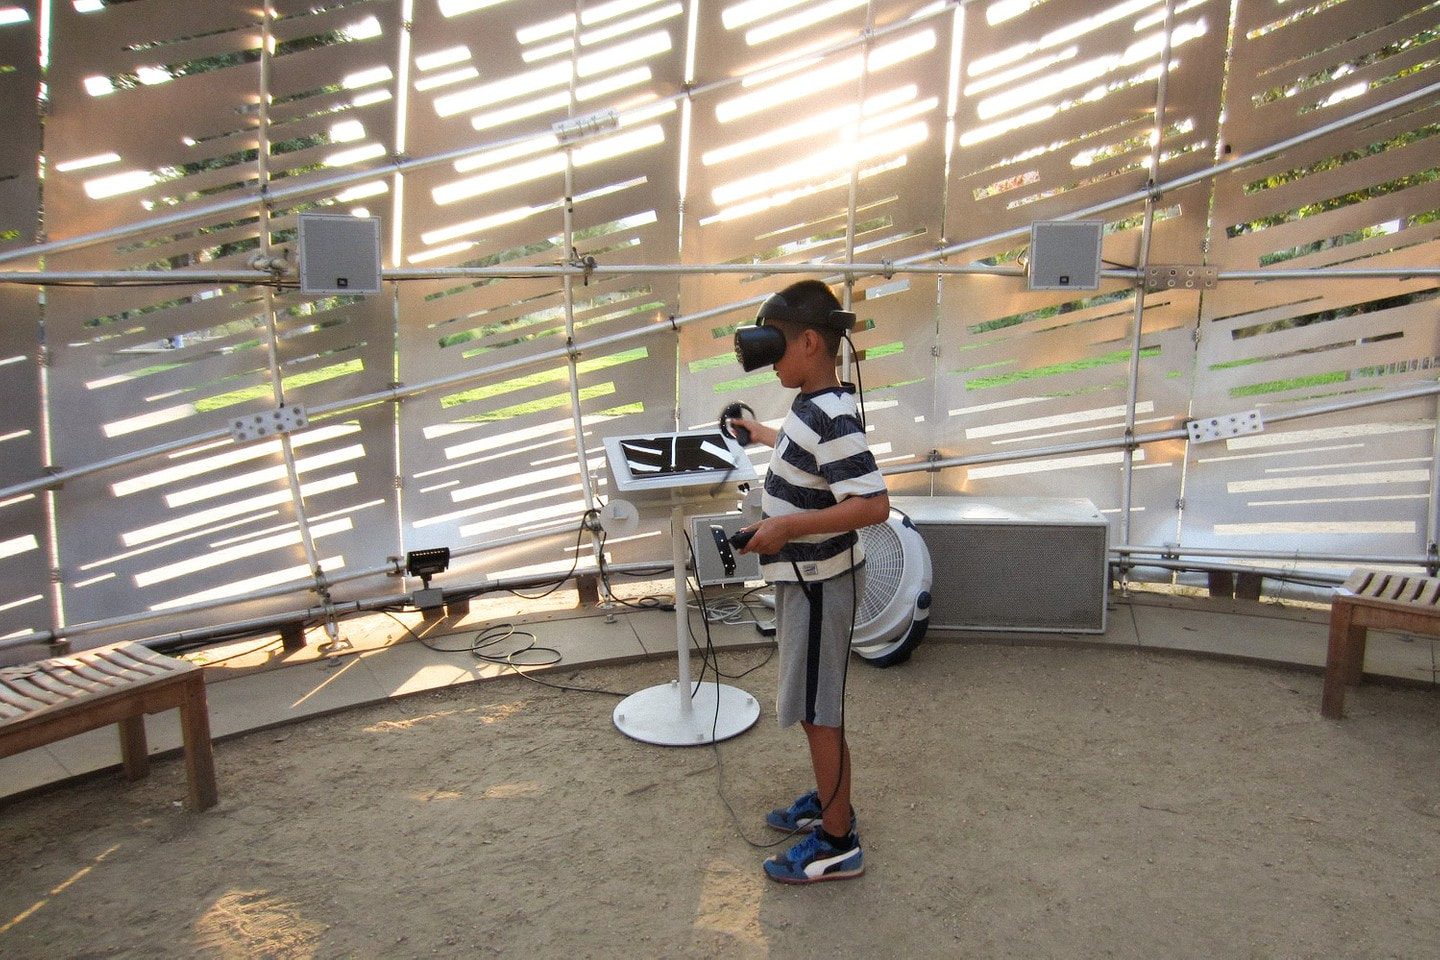 A visitor experincing In Orbit within the Orbit Pavilion